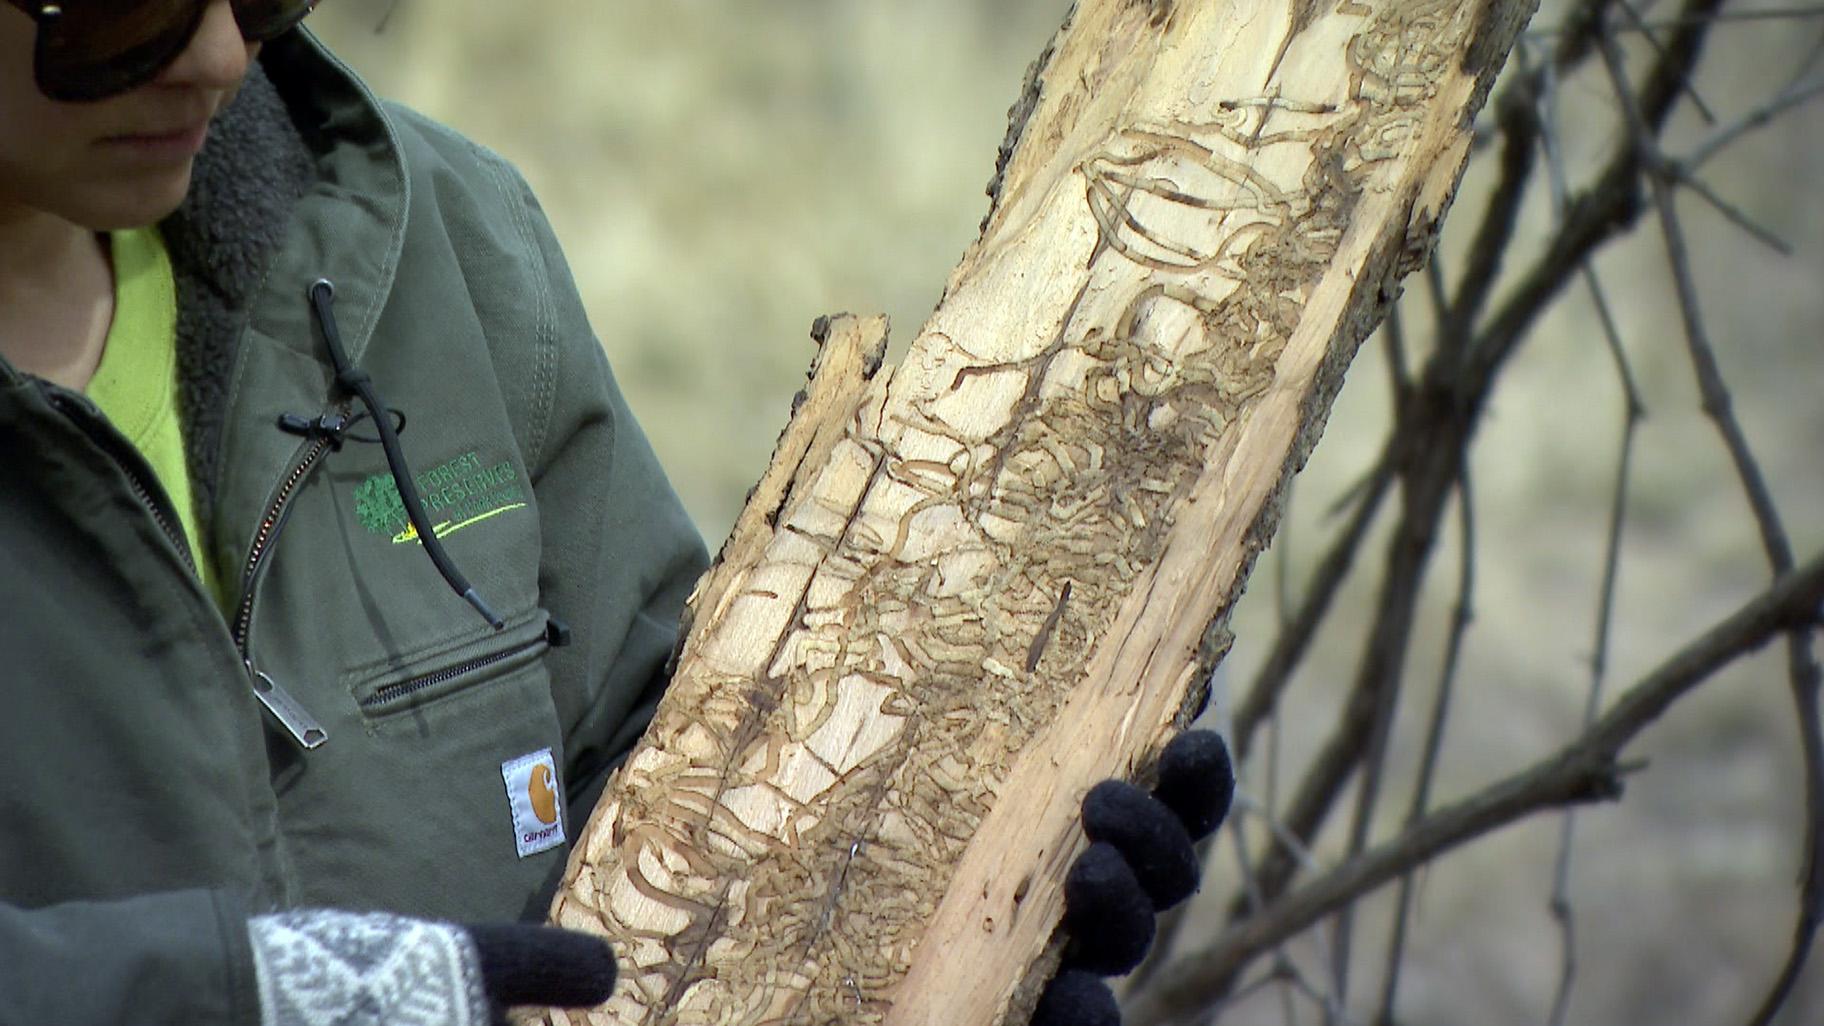 Cook County Forest Preserve wildlife specialist Kim Kalosky shows the trails made by emerald ash borer larvae on the bark of an ash tree in Caldwell Woods on March 4, 2022. (WTTW News) 